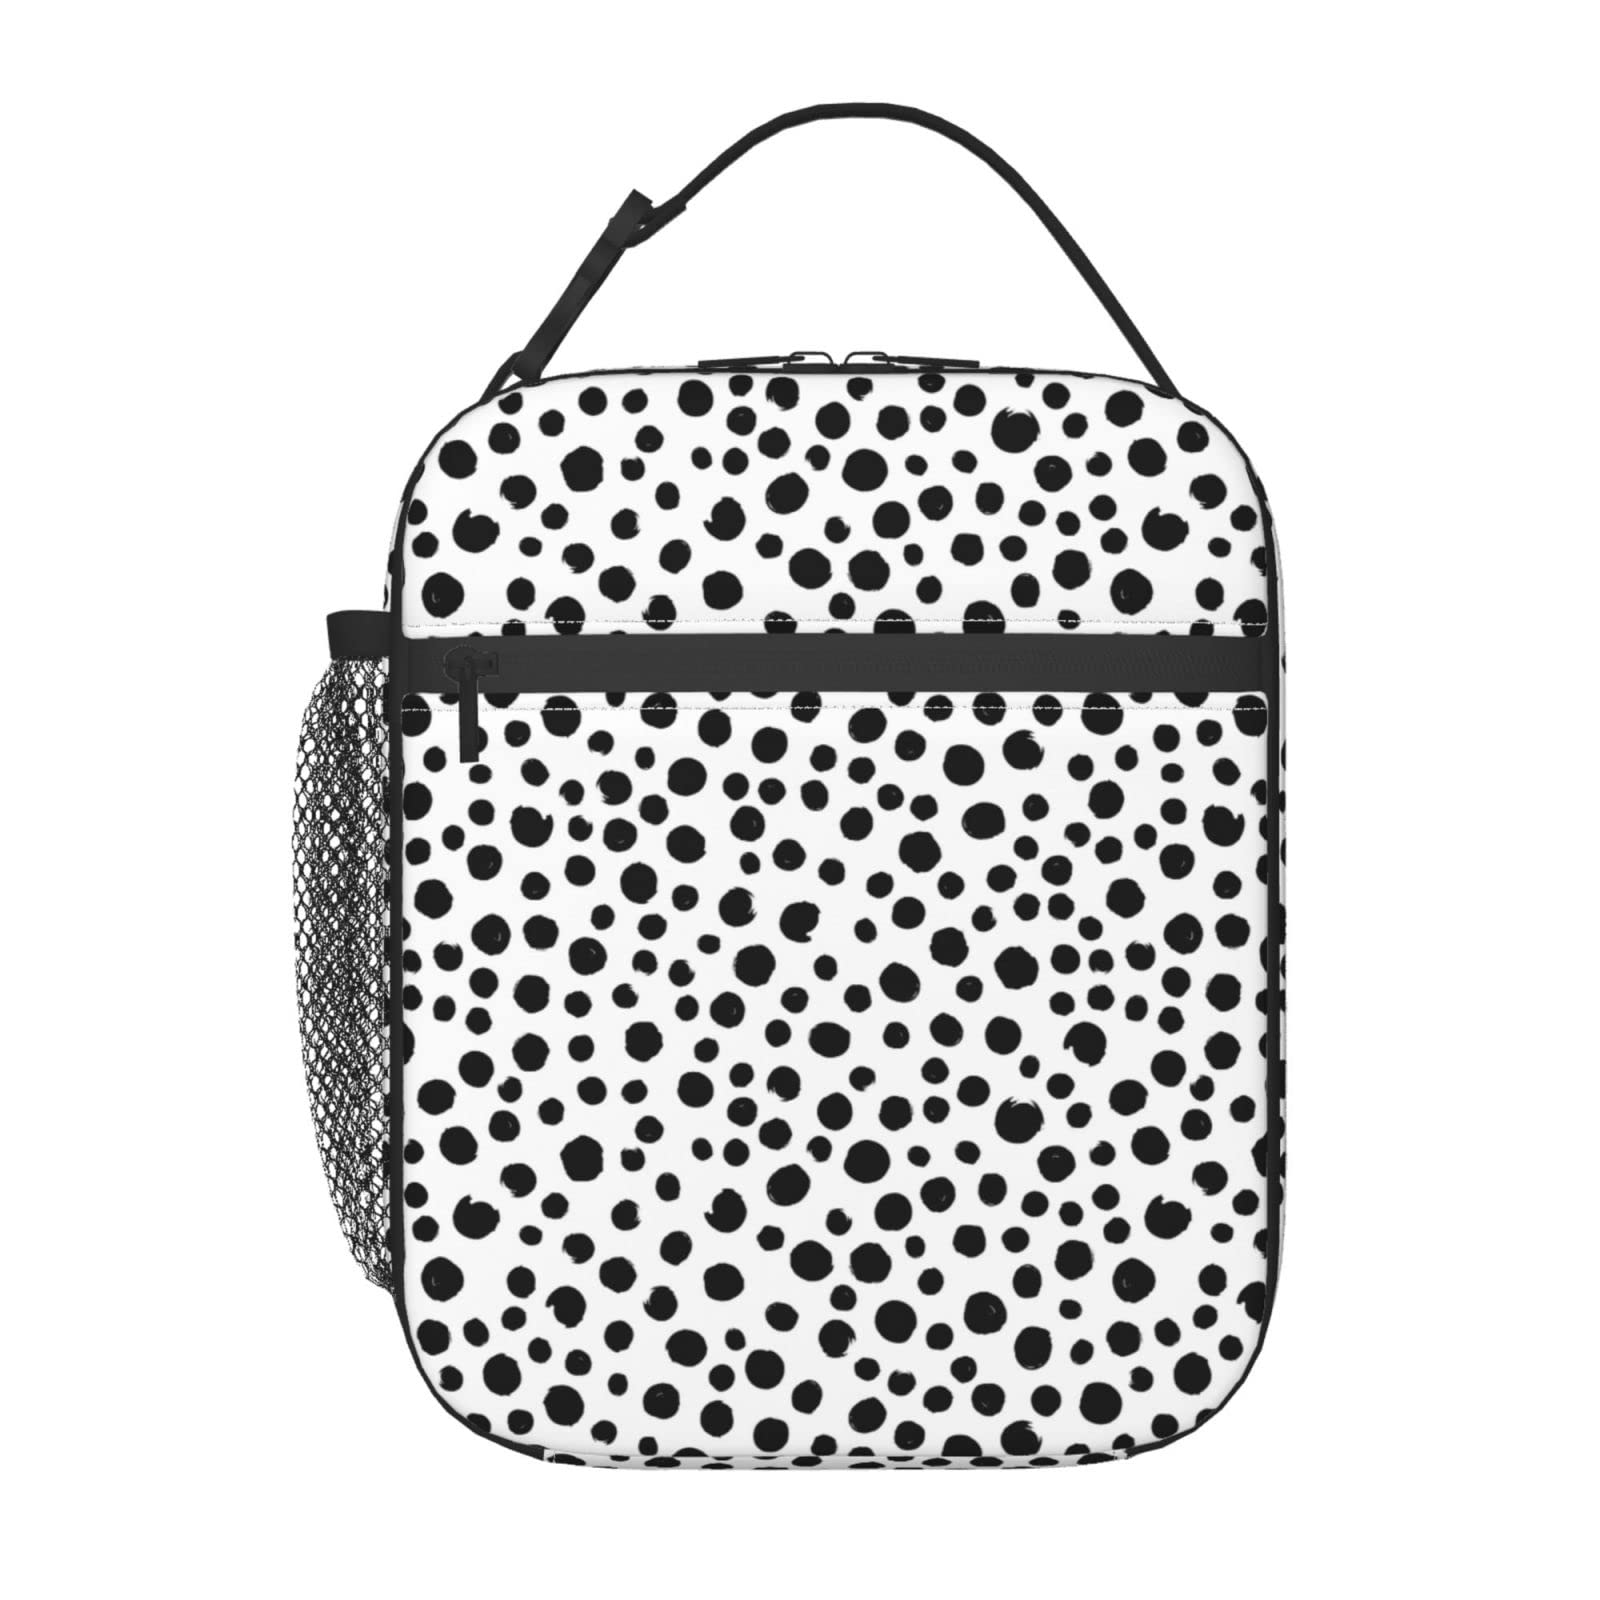 MDMEI Black Polka Dots Lunch Bag for Kids Teen Boys Girls Insulated Durable Reusable Cooler Square Lunch Box Bag for School Work Outdoor